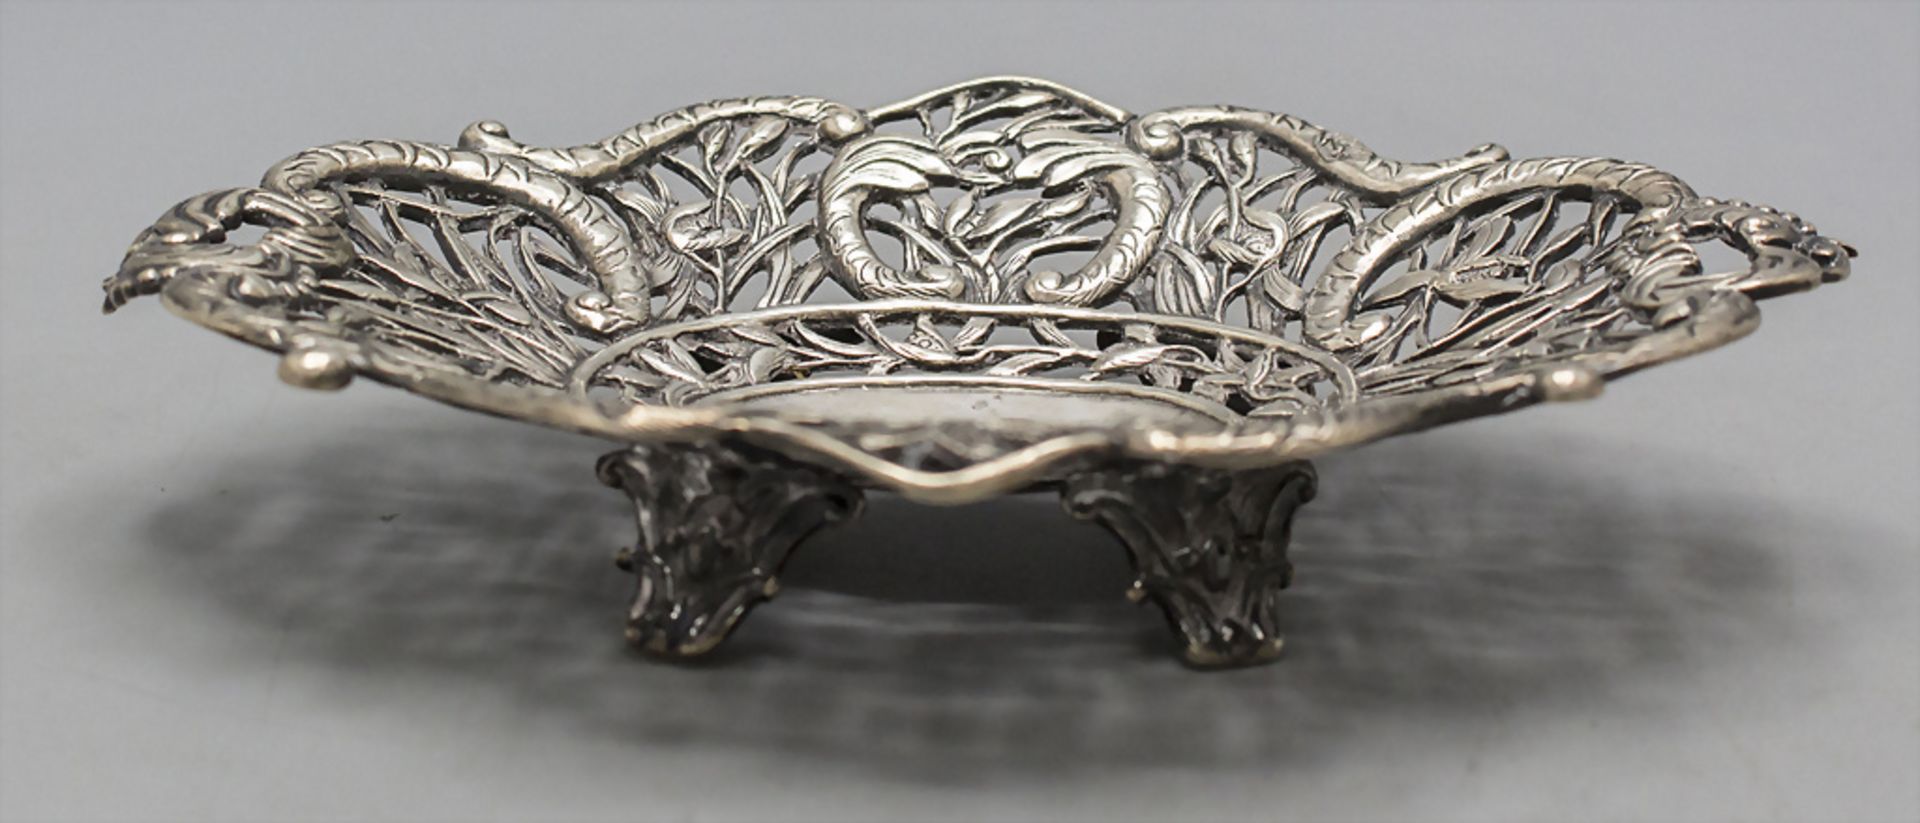 Kleine Korbschale / A small Chinese Export silver basket bowl, Wang Hing & Co., Hong Kong, um 1880 - Image 2 of 5